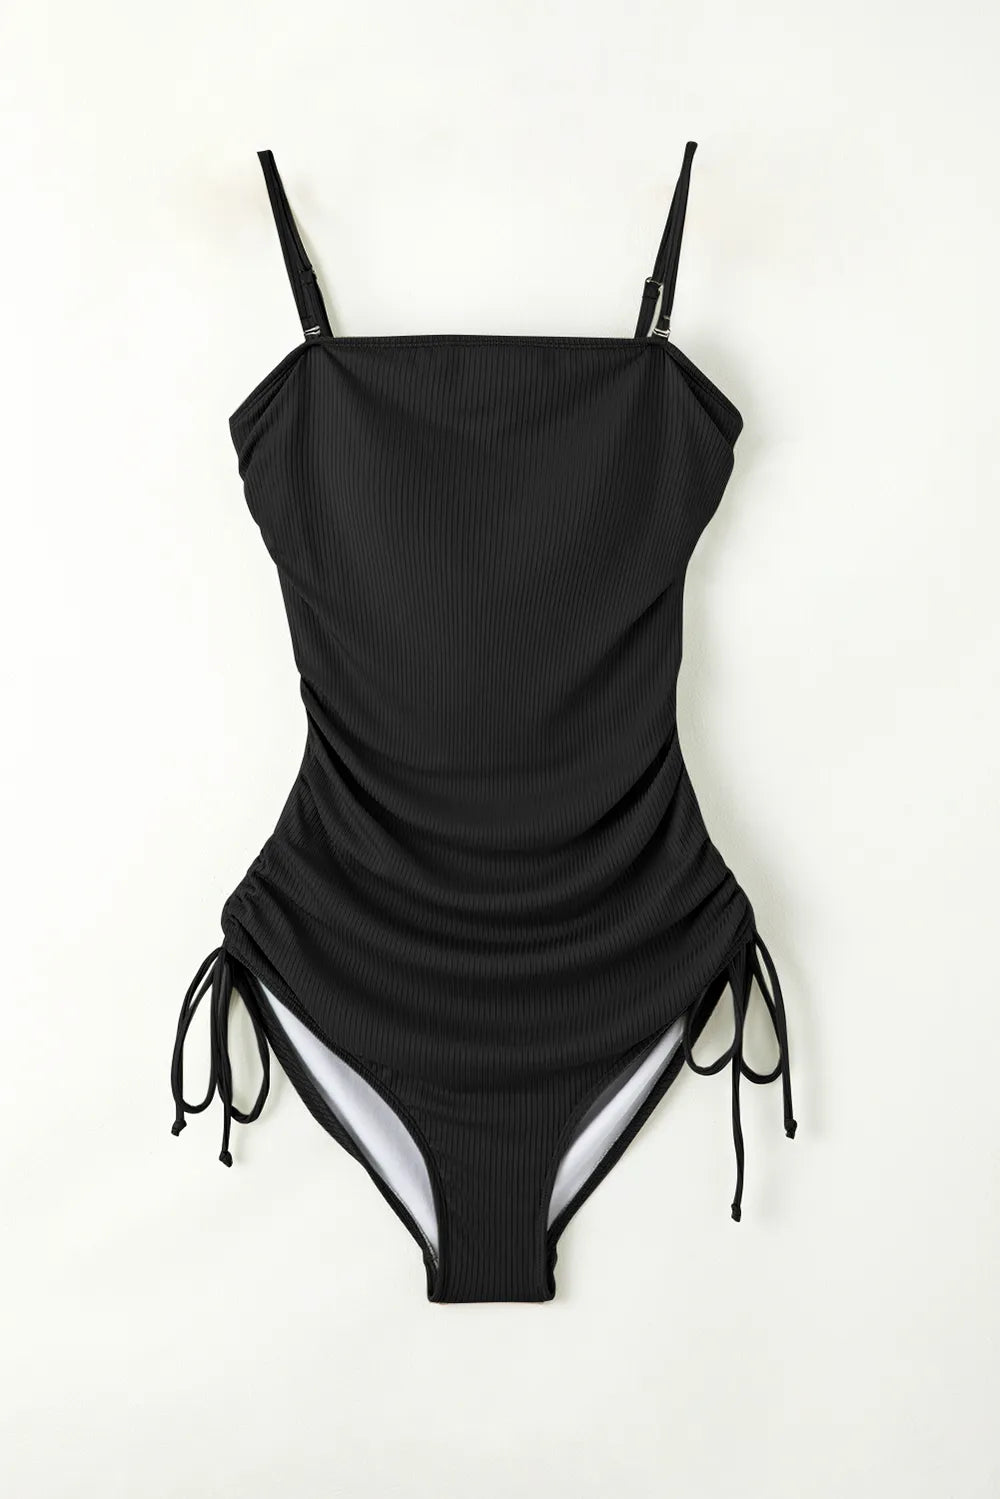 Elevate your beach style with our chic, adjustable one-piece swimsuit. Perfect fit, enduring comfort, and timeless elegance.